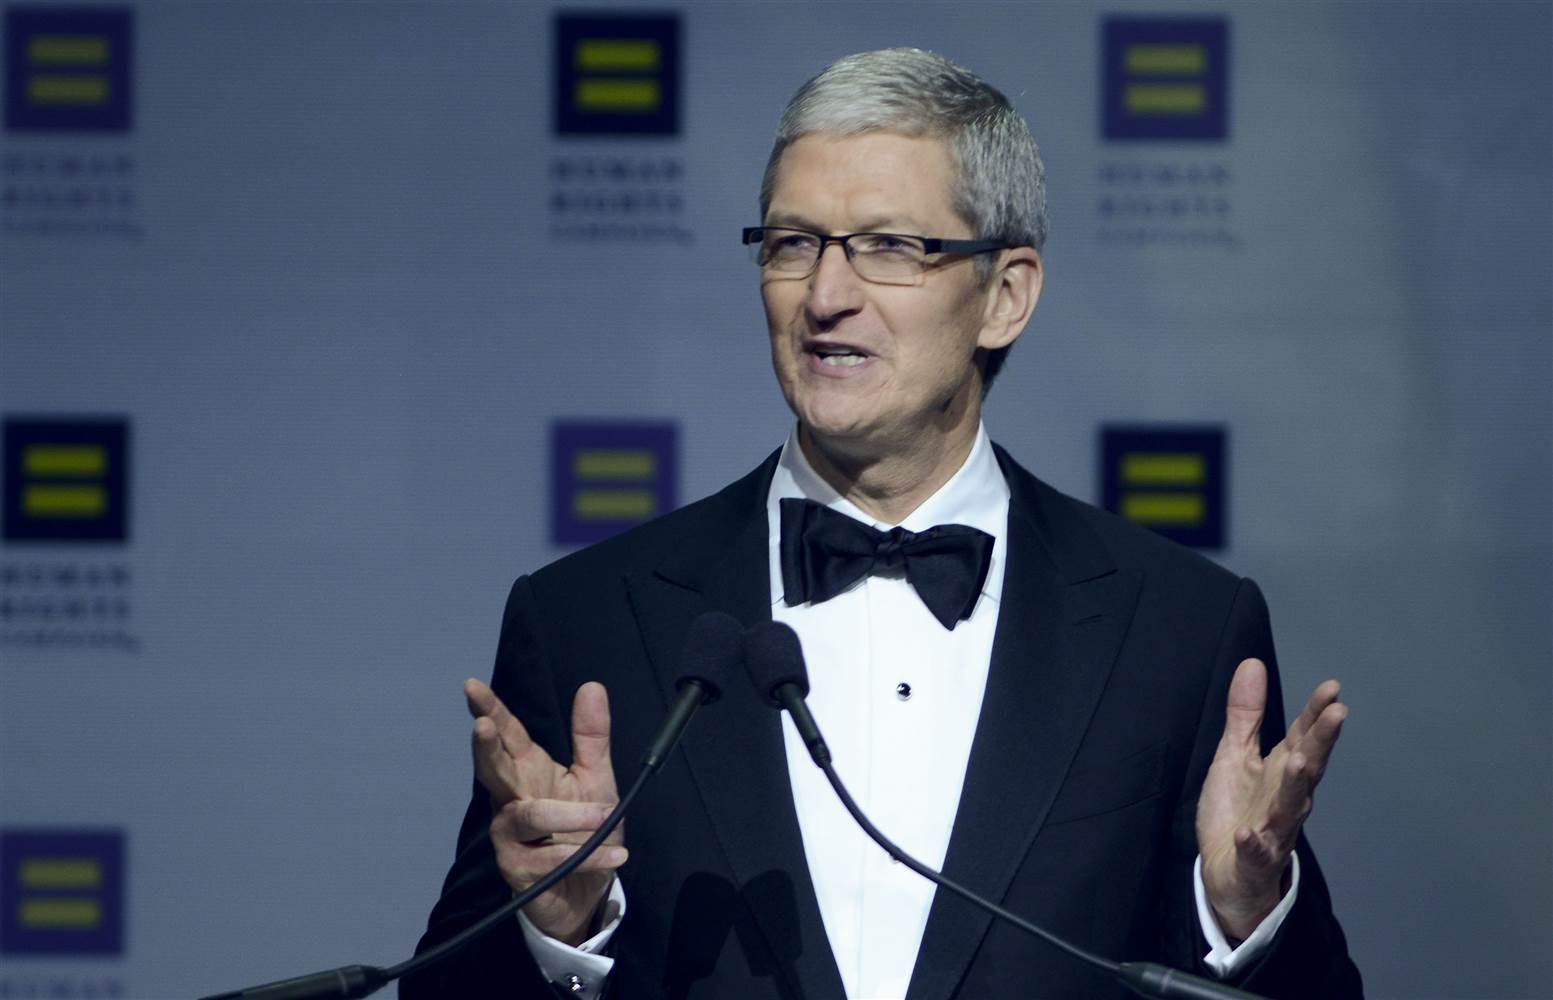 Video: Tim Cook is honored by the Human Rights Campaign